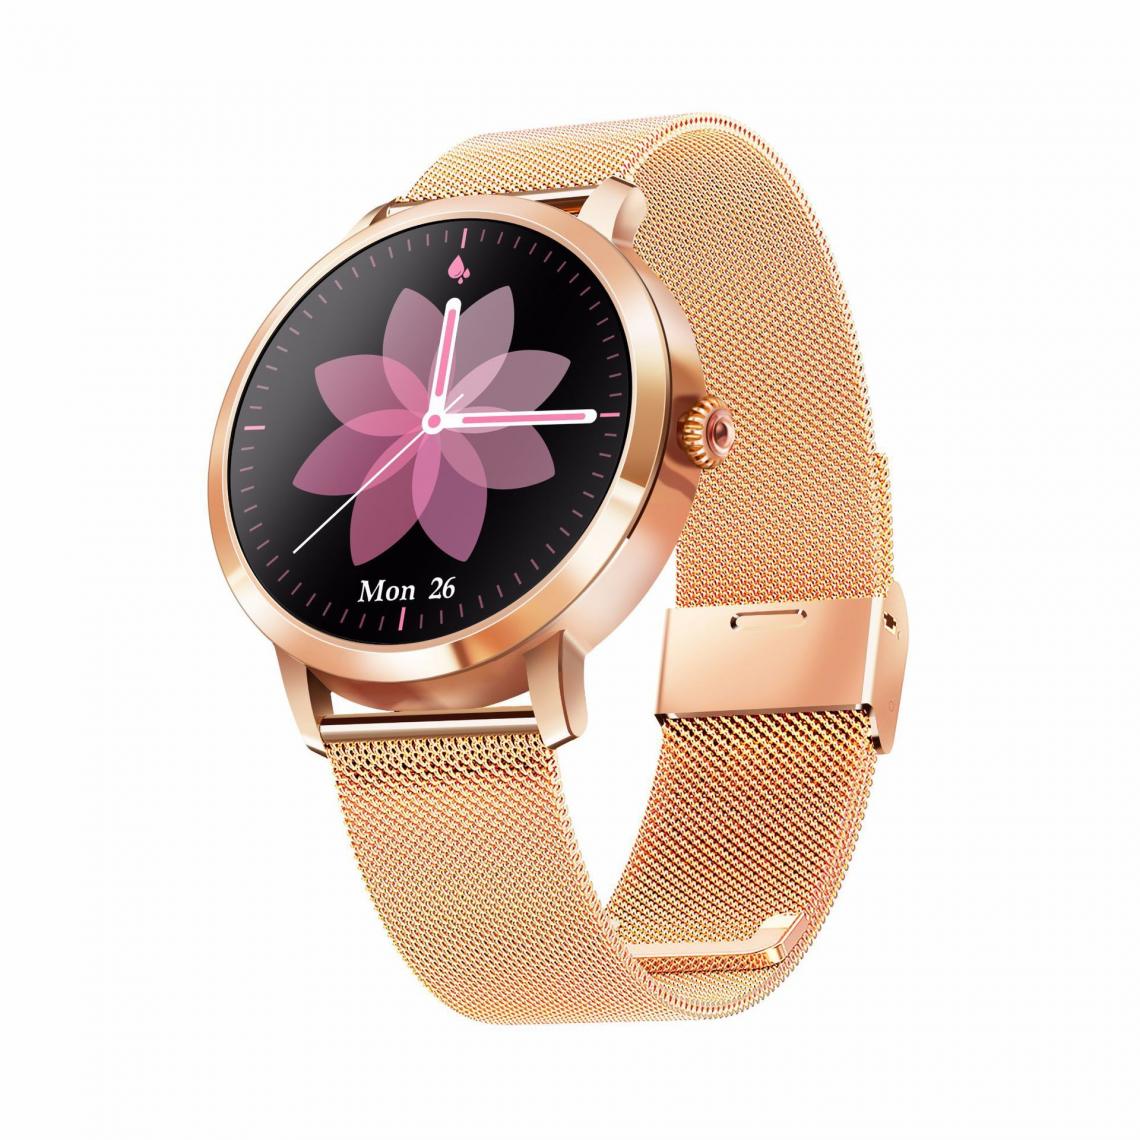 Chronotech Montres - Women Smart Watch with Female Function, Waterproof Sport Smartwatch, Blood Oxygen and Heart Rate Monitor, Calorie Pedometer, Fitness Watch for Android iphone(gold) - Montre connectée